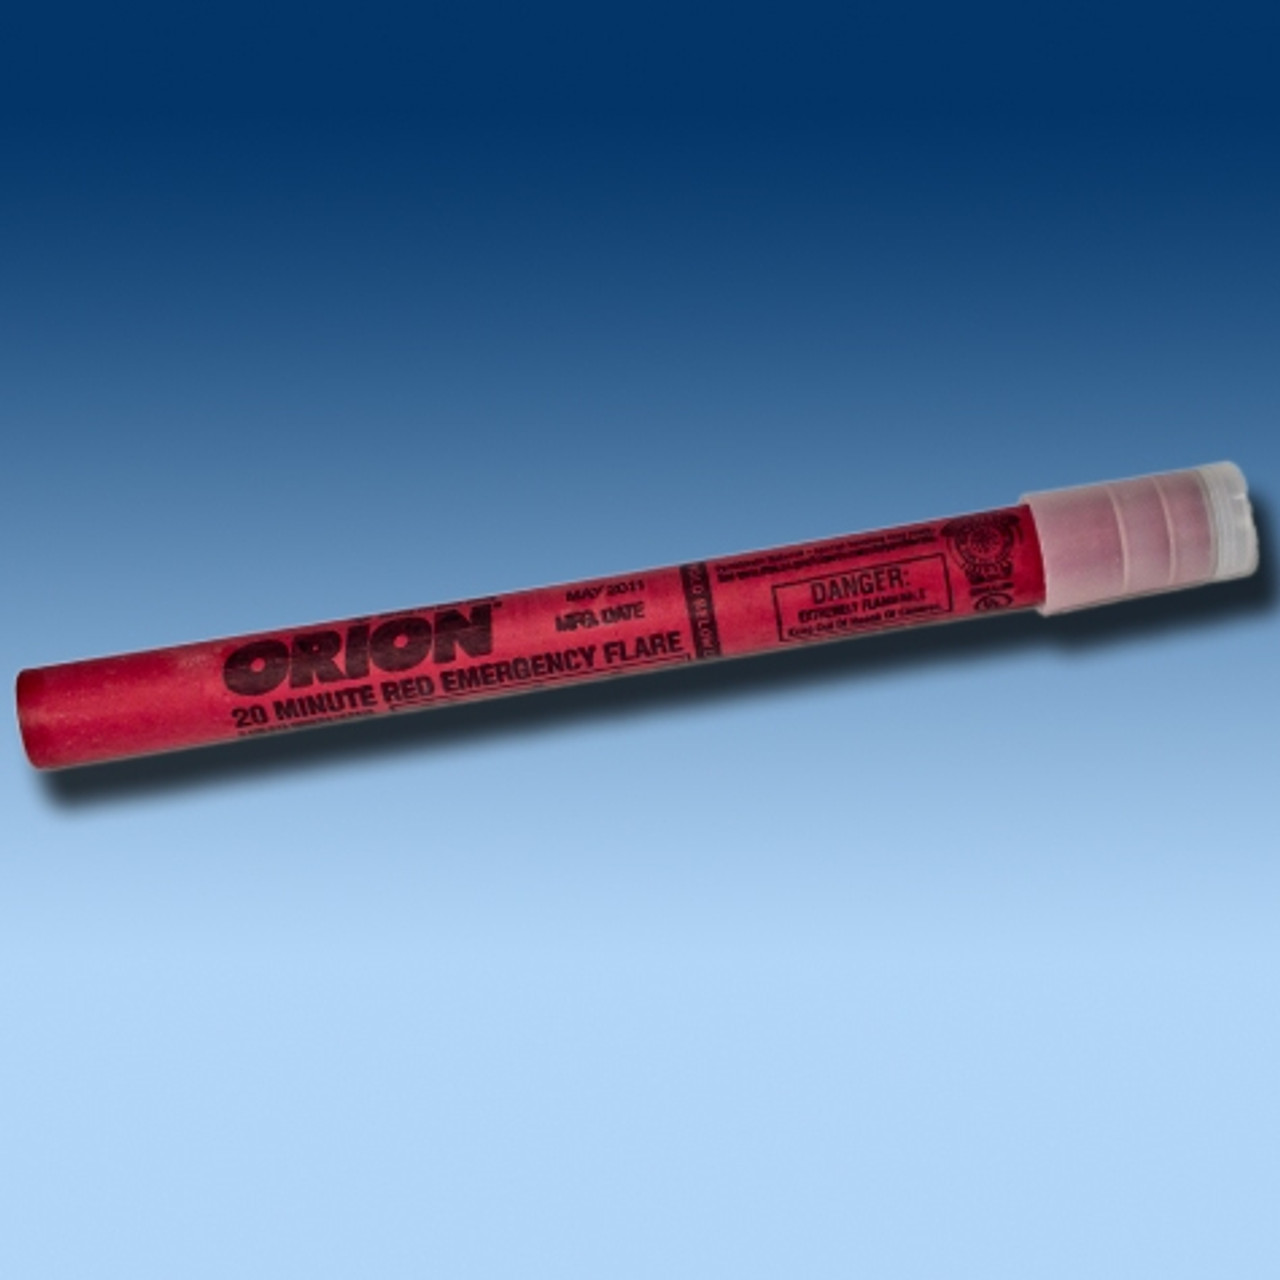 Orion 7200 Red Waxed Plastic Cap Spikeless Emergency Road Flare